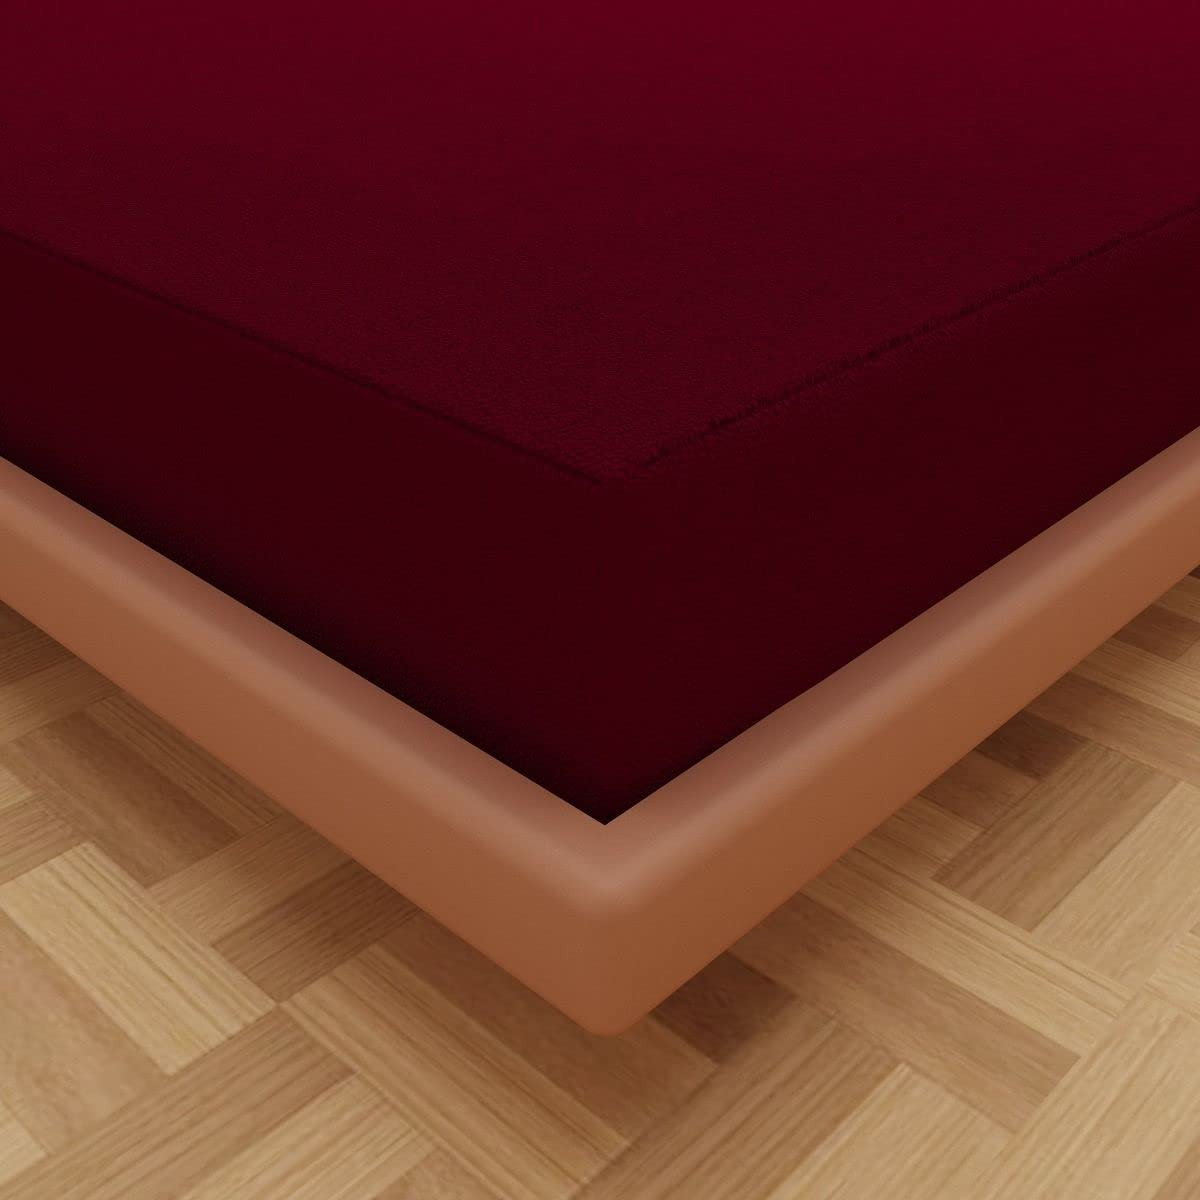 Kuber Industries Waterproof Double Bed Mattress Cover|Breathable Terry Cotton Surface & Elastic Fitted Mattress Protector,6 x 6.5 Ft. (Maroon)